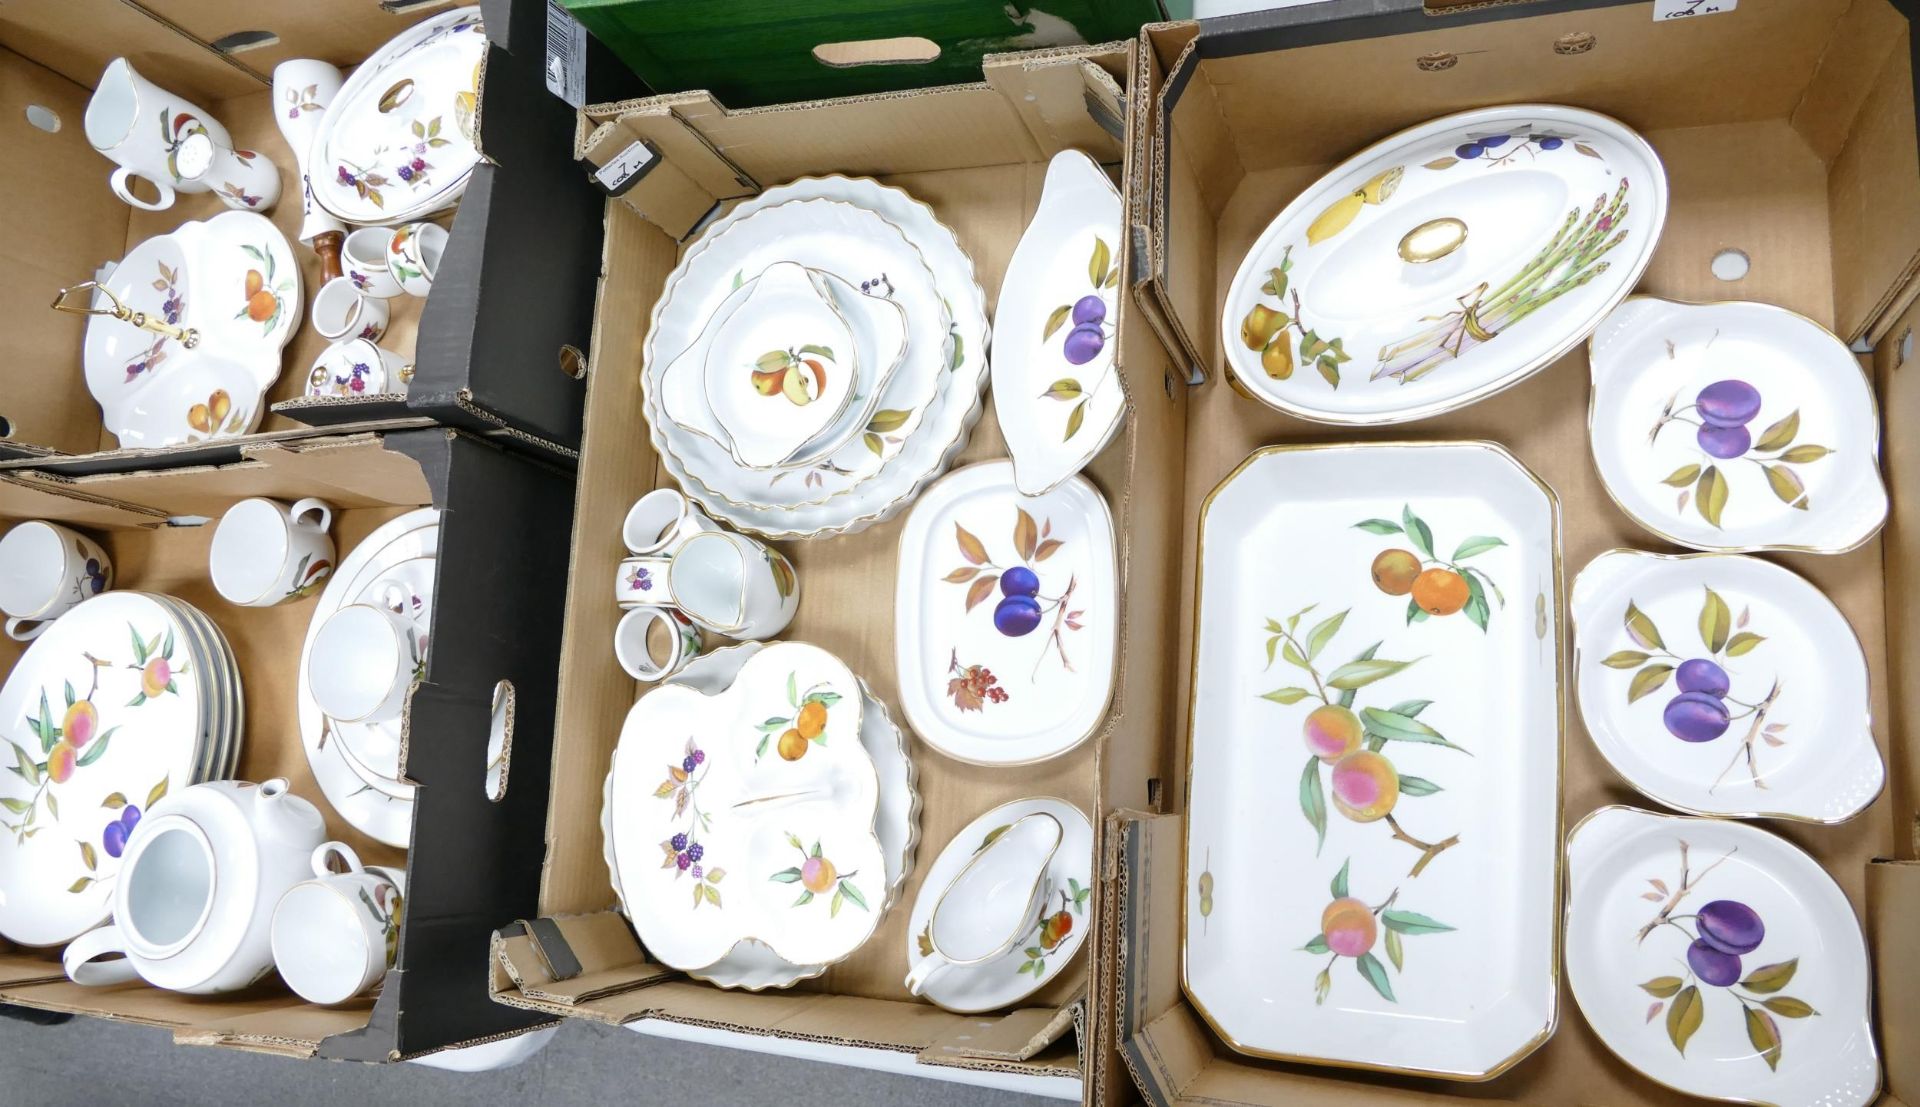 A large Collection of Royal Worcester Evesham Patterned Tea & dinner ware(4 trays) - Image 2 of 2